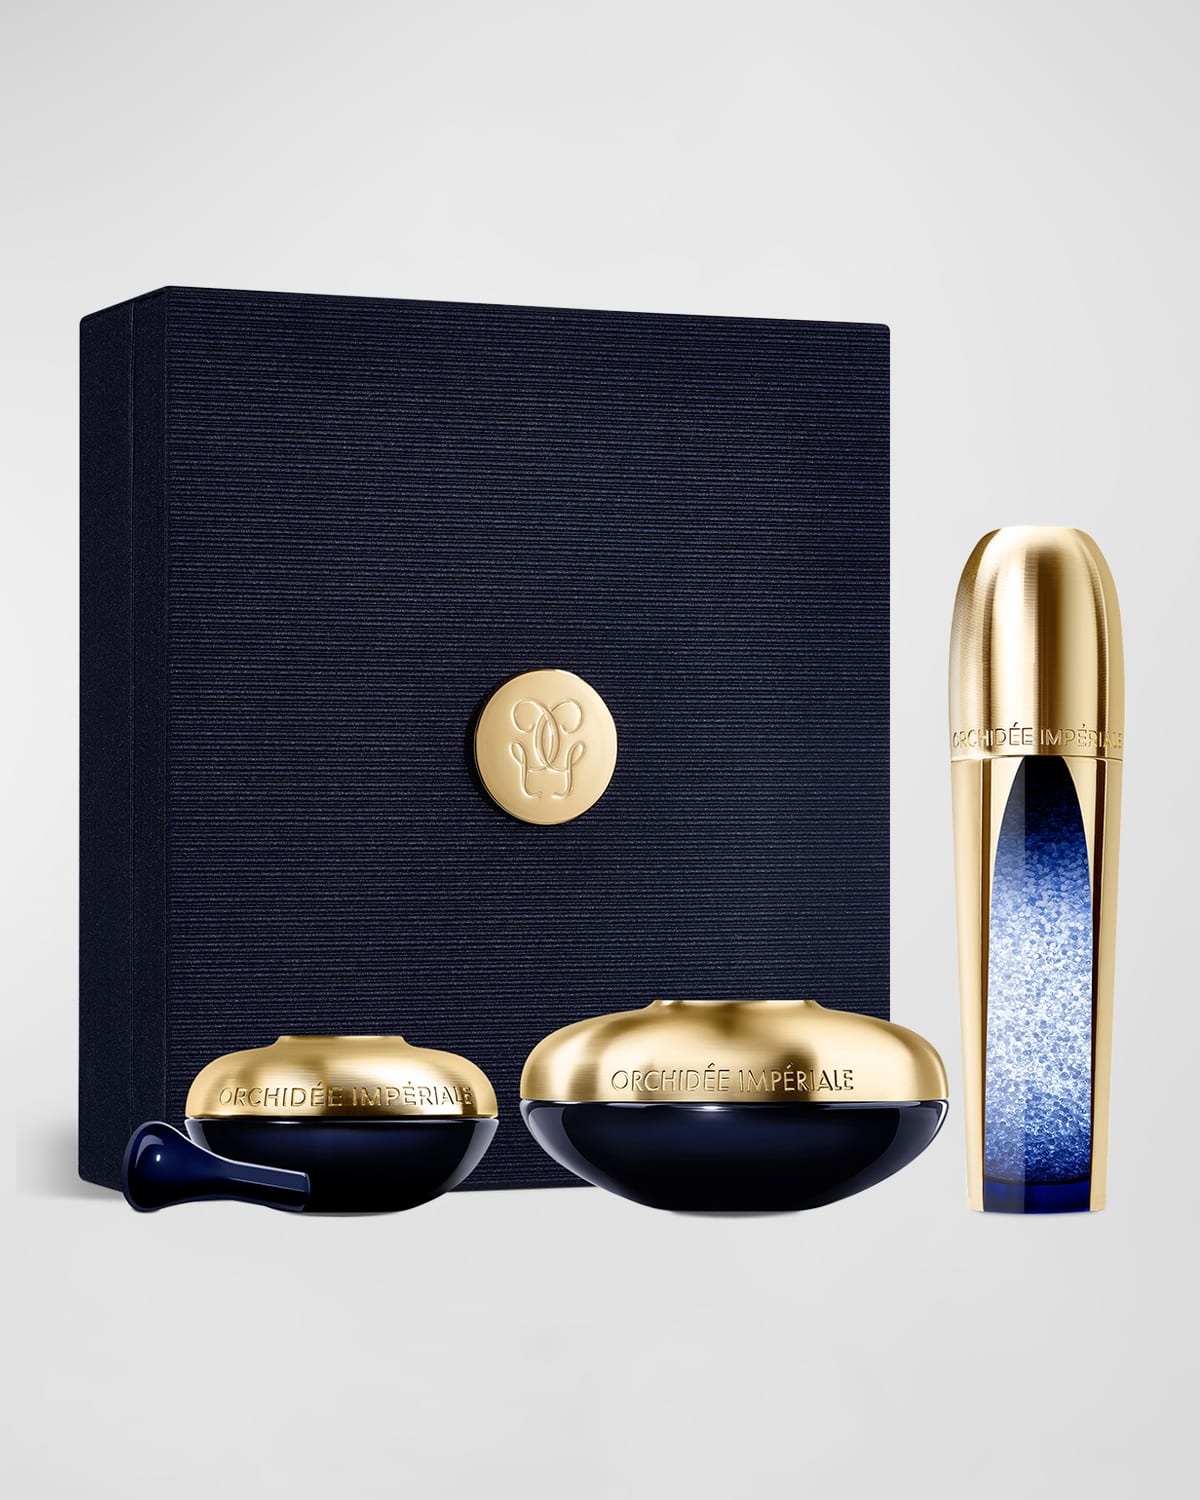 Shop Guerlain Limited Edition Orchidee Imperiale Ritual Set